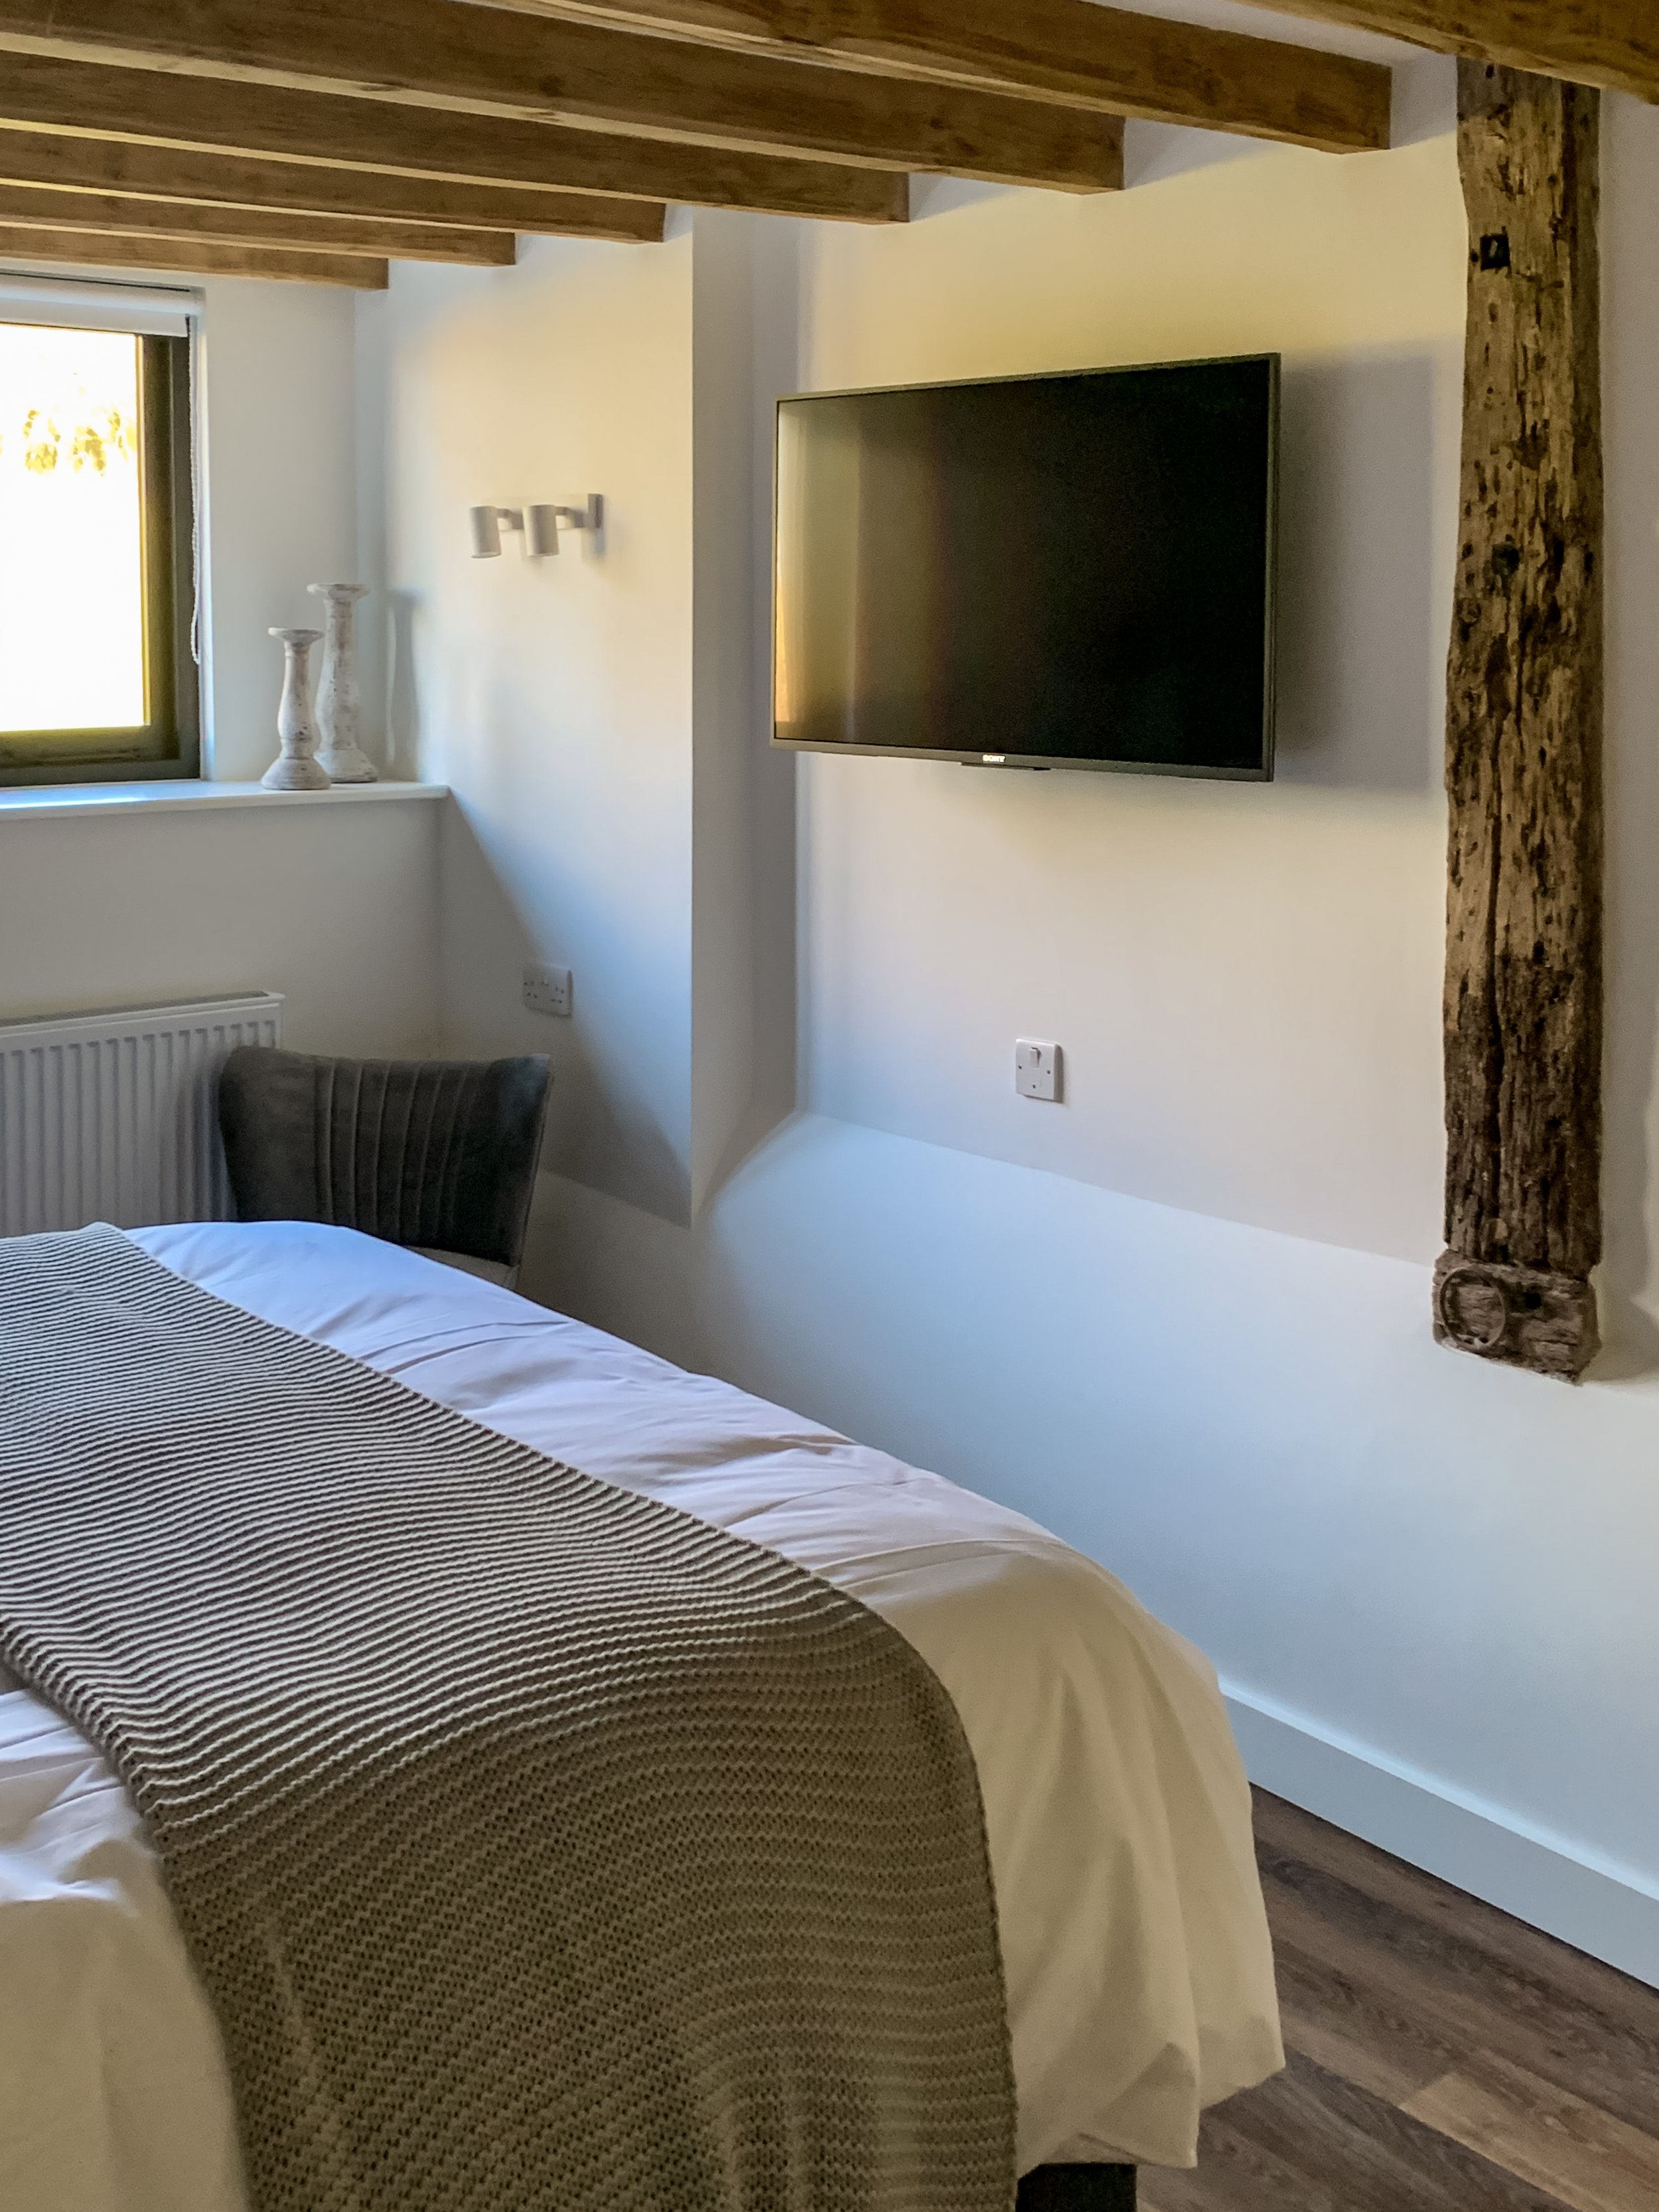 Tv's and home comforts when you stay at Elvey Farm Country Hotel